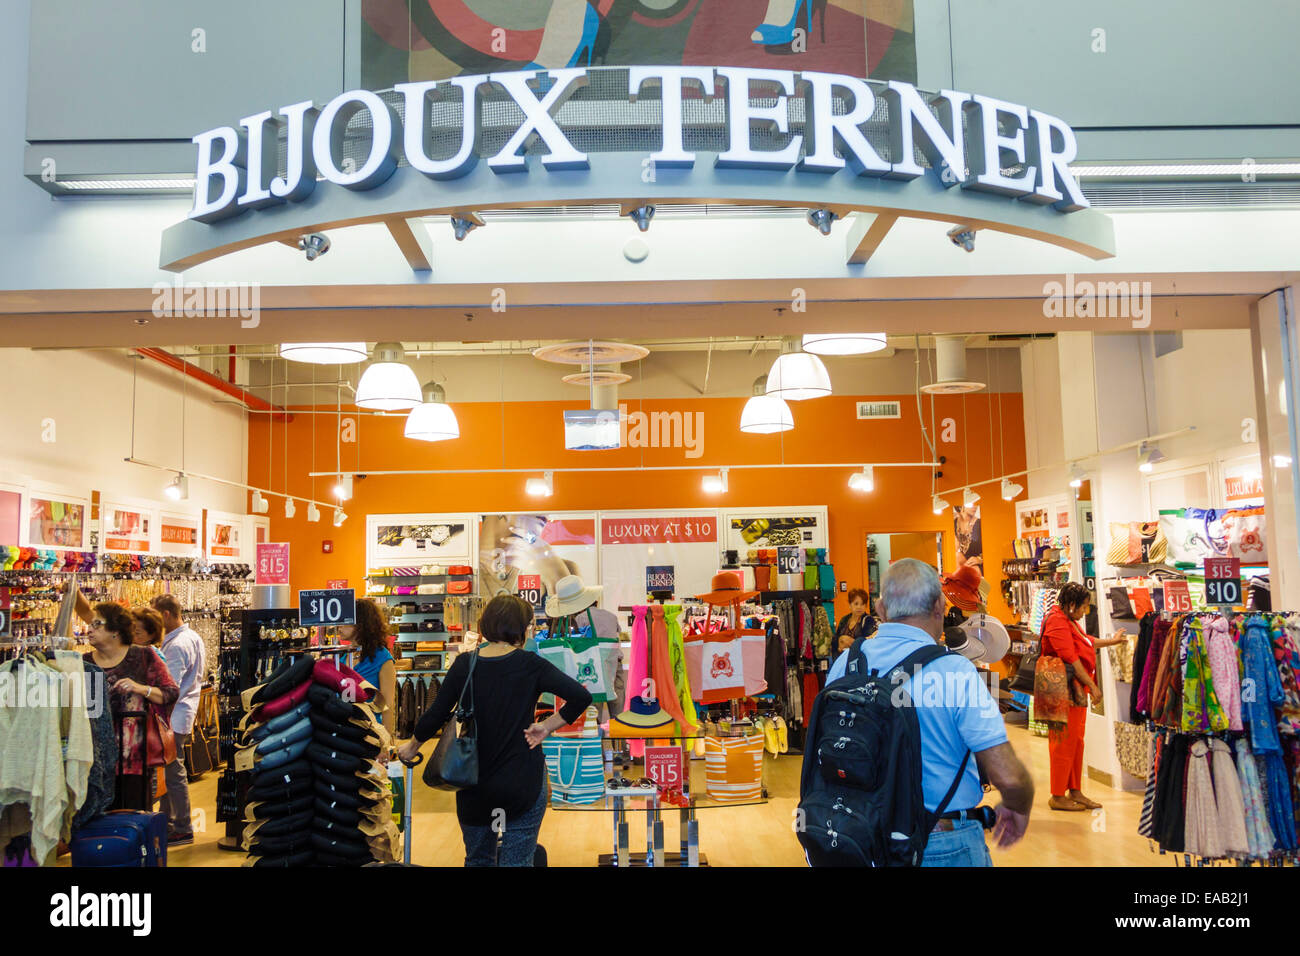 Bijoux terner hi-res stock photography and images - Alamy